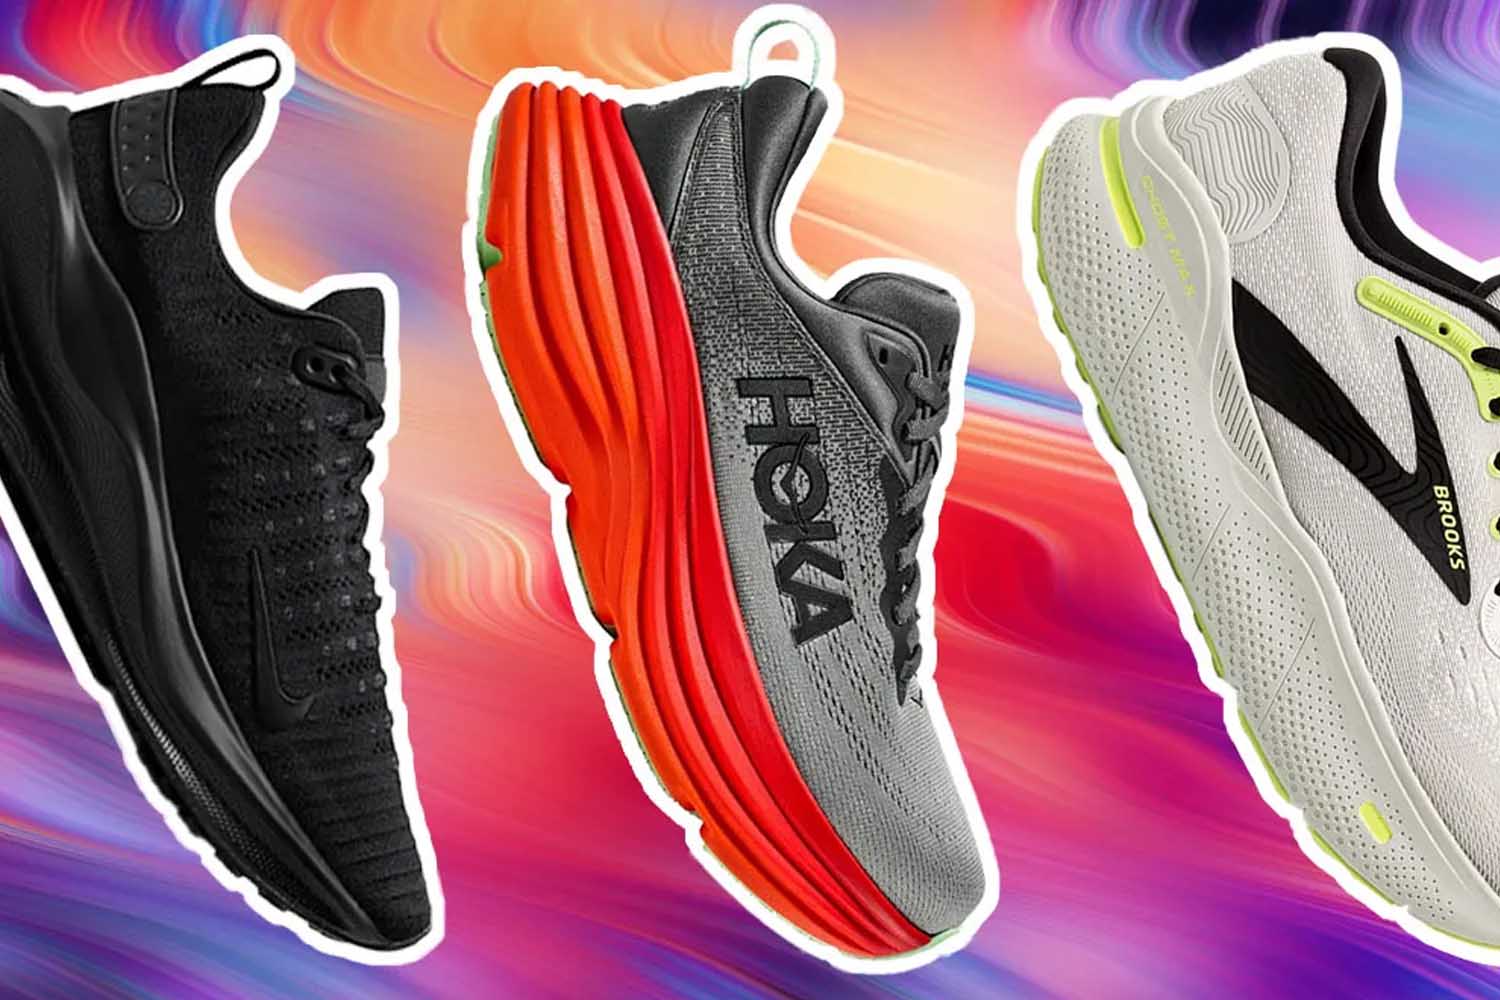 Nike's Best Cushioned Shoes For Running and Walking.